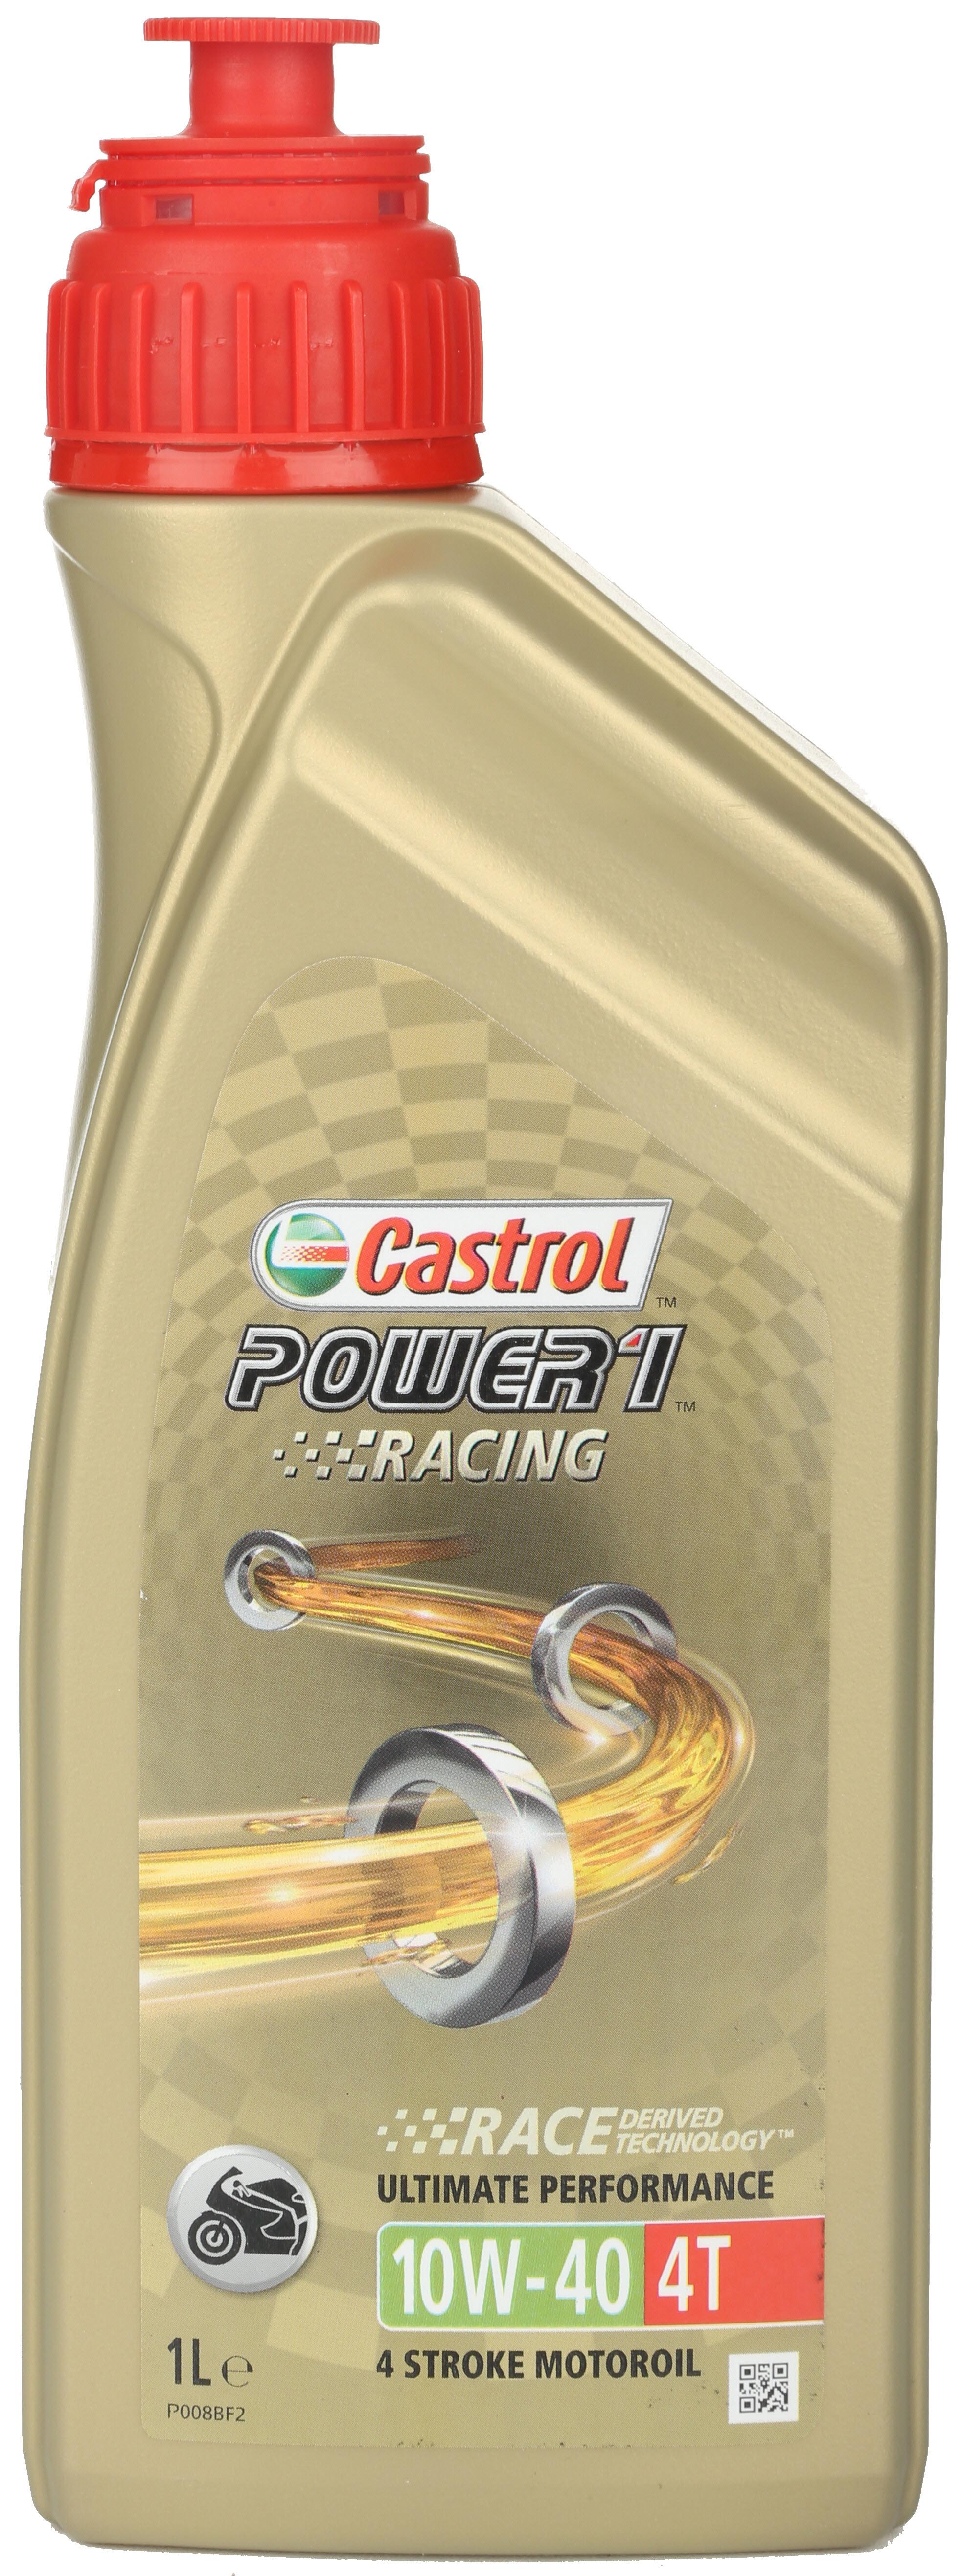 Castrol Power 1 Racing 4T 10W/40 Motorcycle Engine Oil - 1Ltr